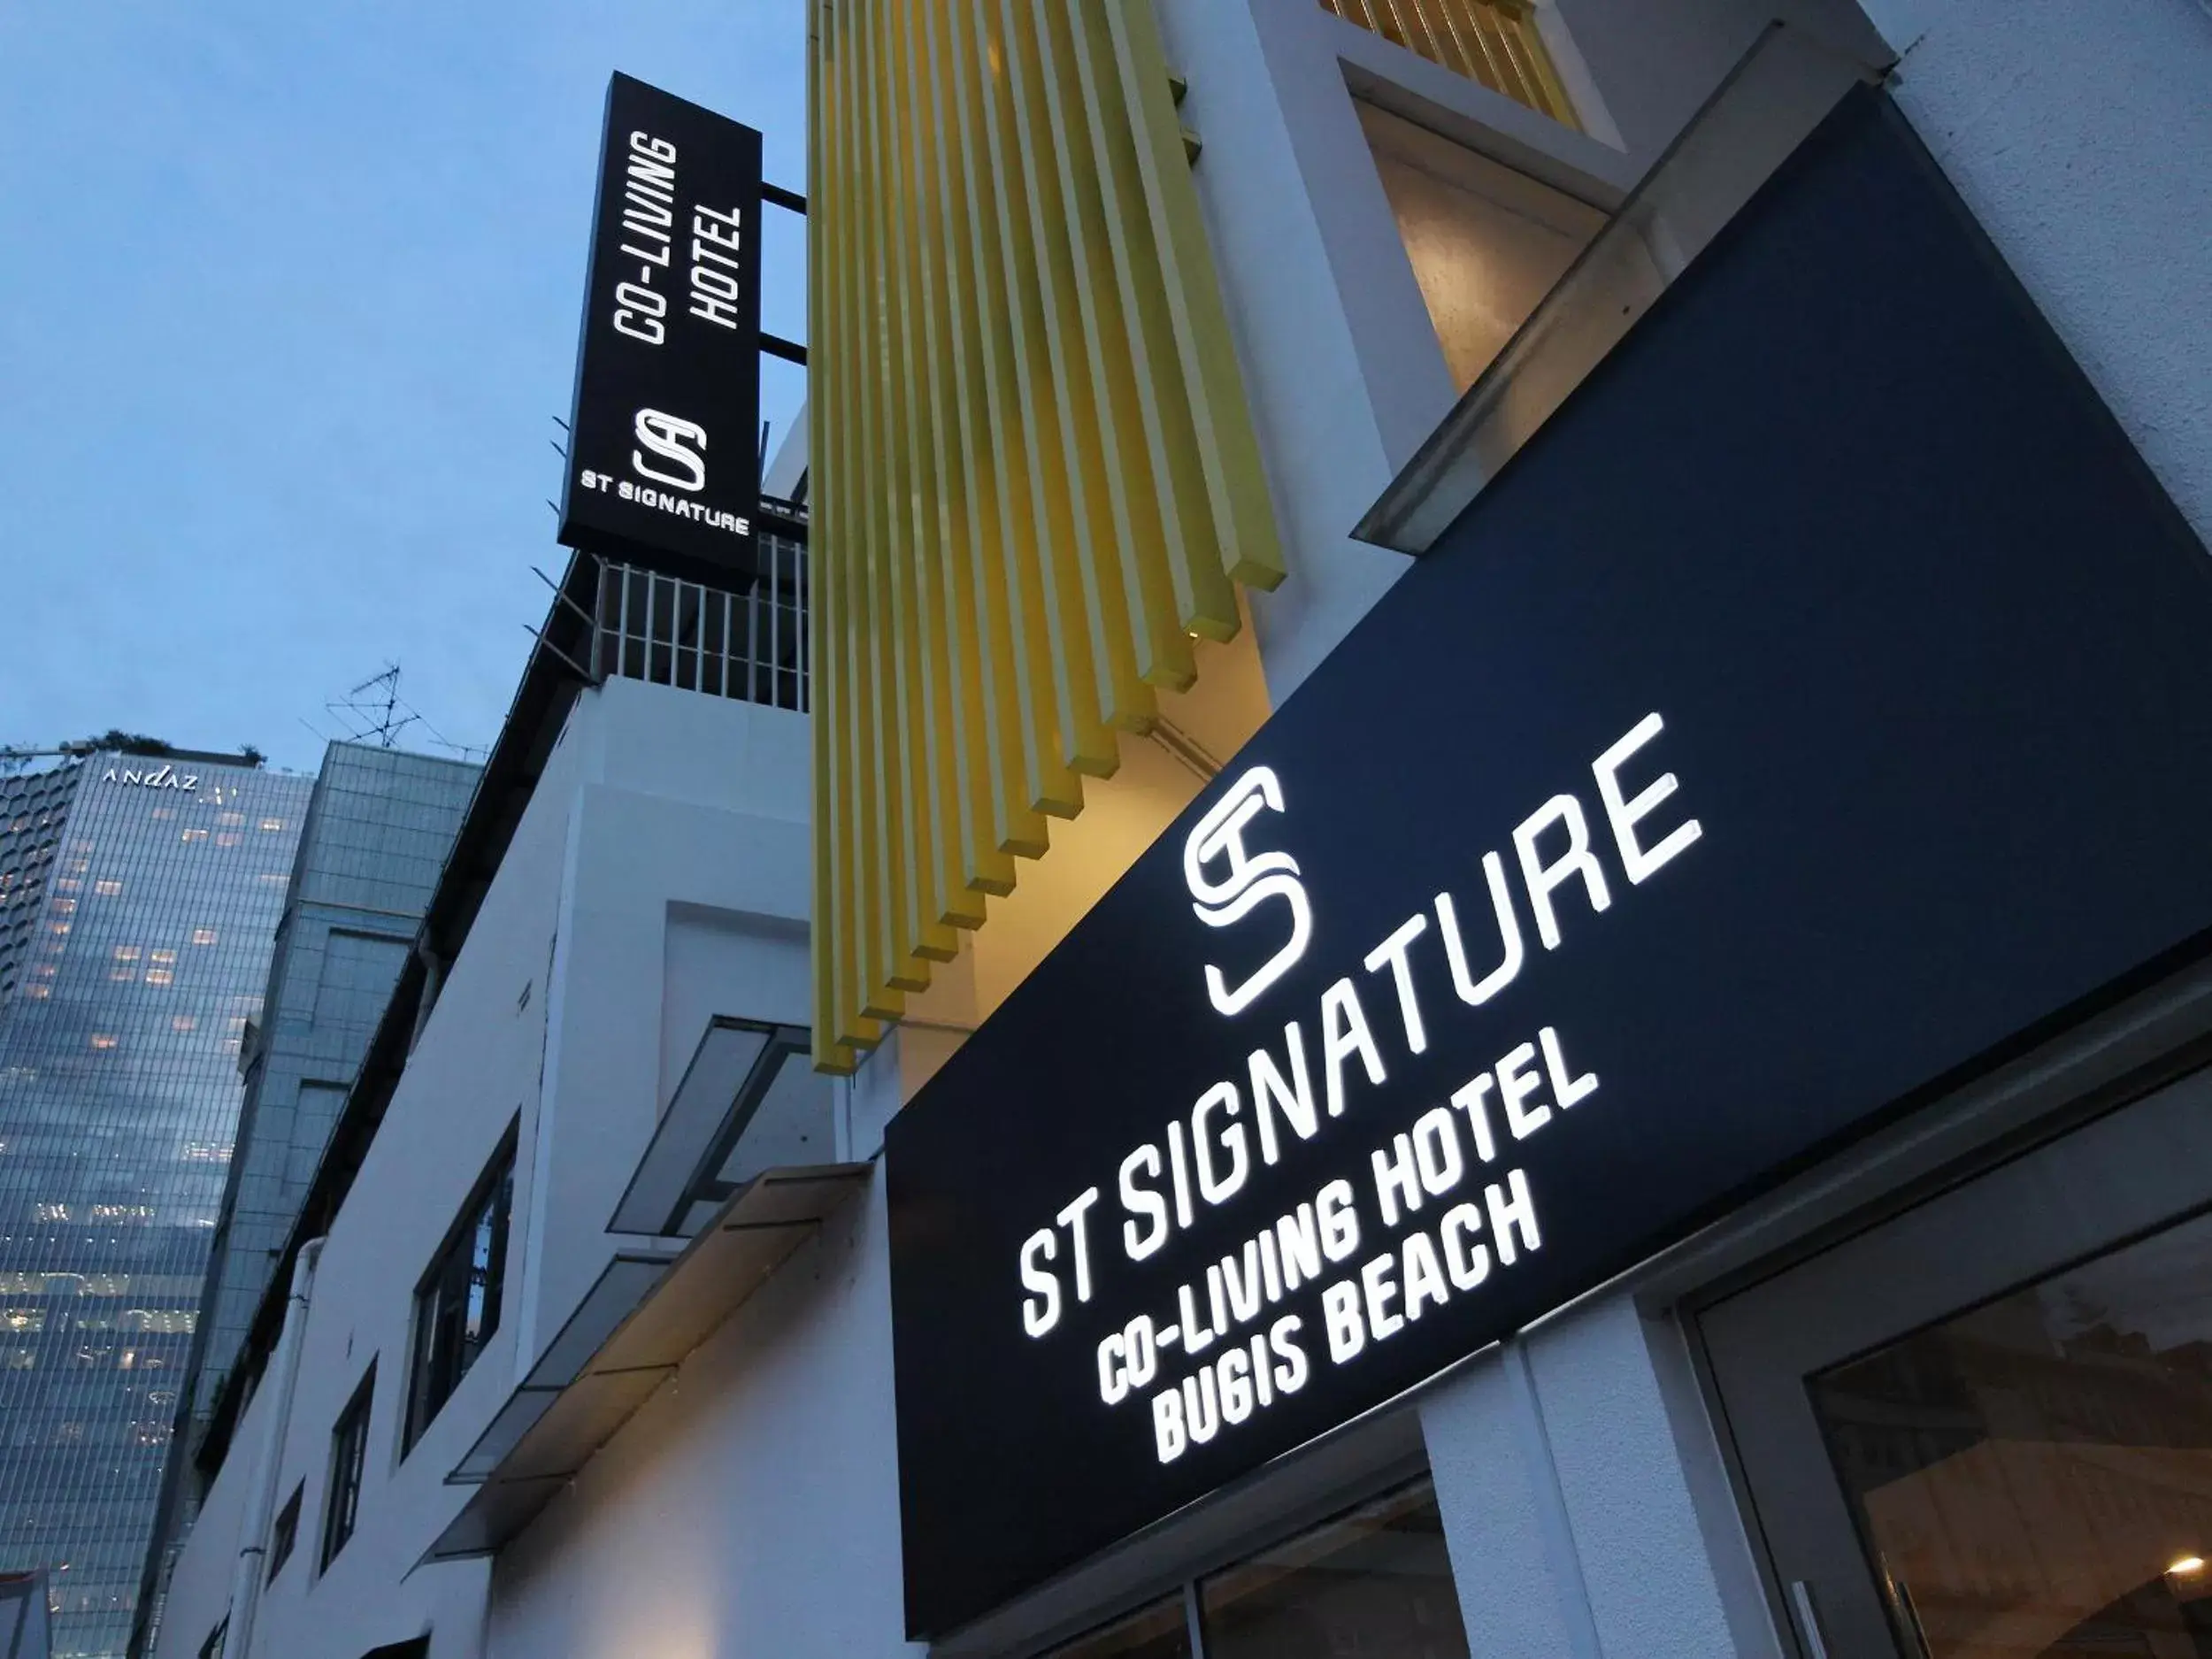 Property logo or sign, Property Logo/Sign in ST Signature Bugis Beach, DAYUSE, 8-9 Hours, check in 8AM or 11AM